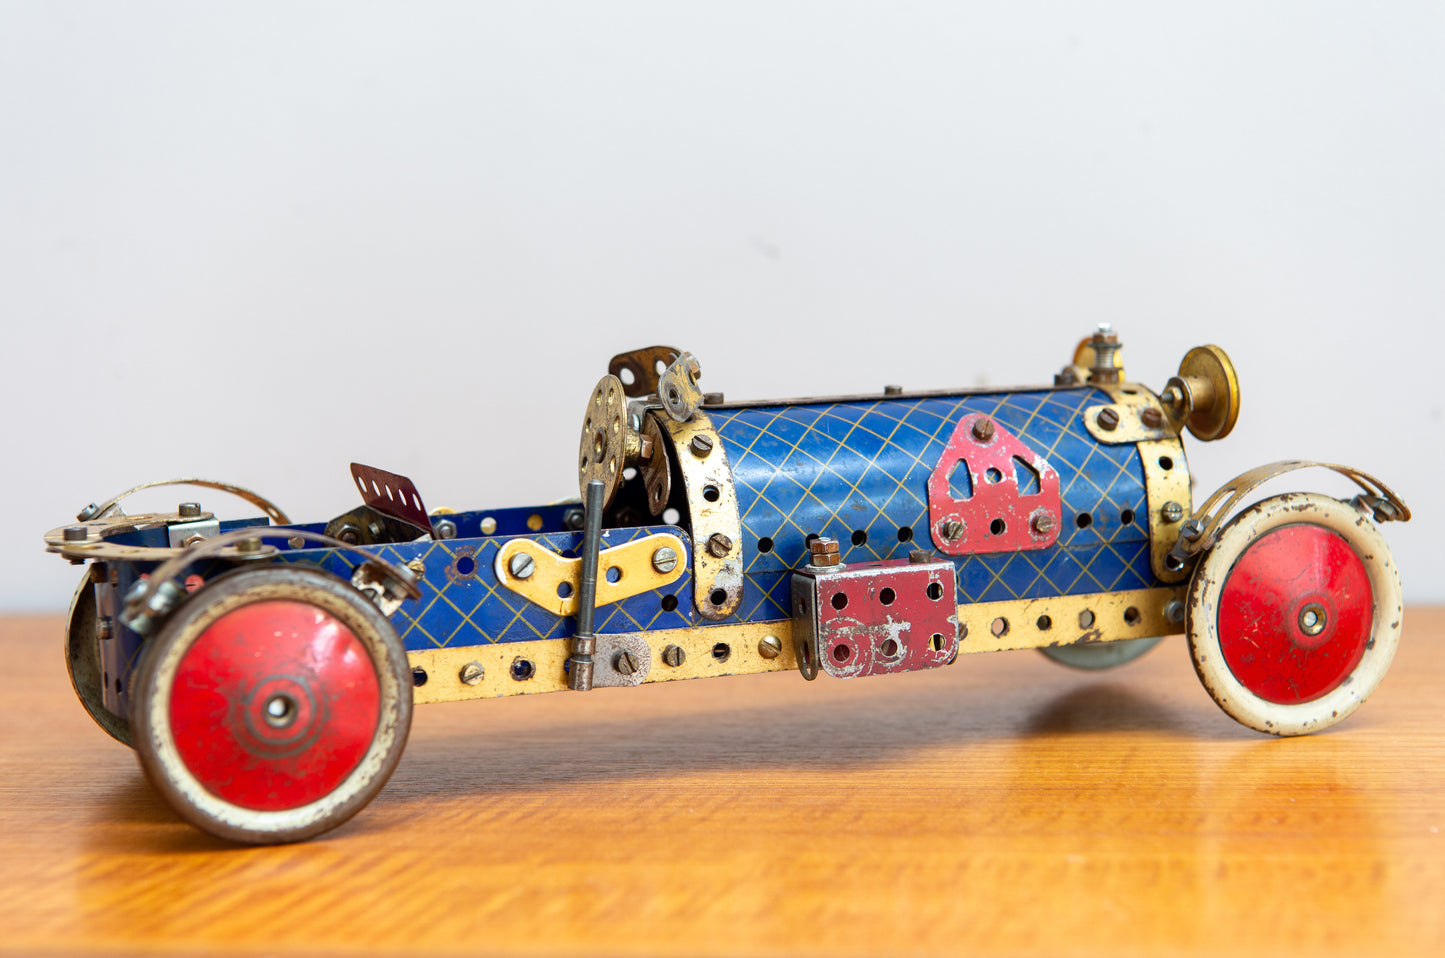 A Fine Scratch Built Meccano Racing Car In Red Blue And Gold. Made In England. Circa 1940